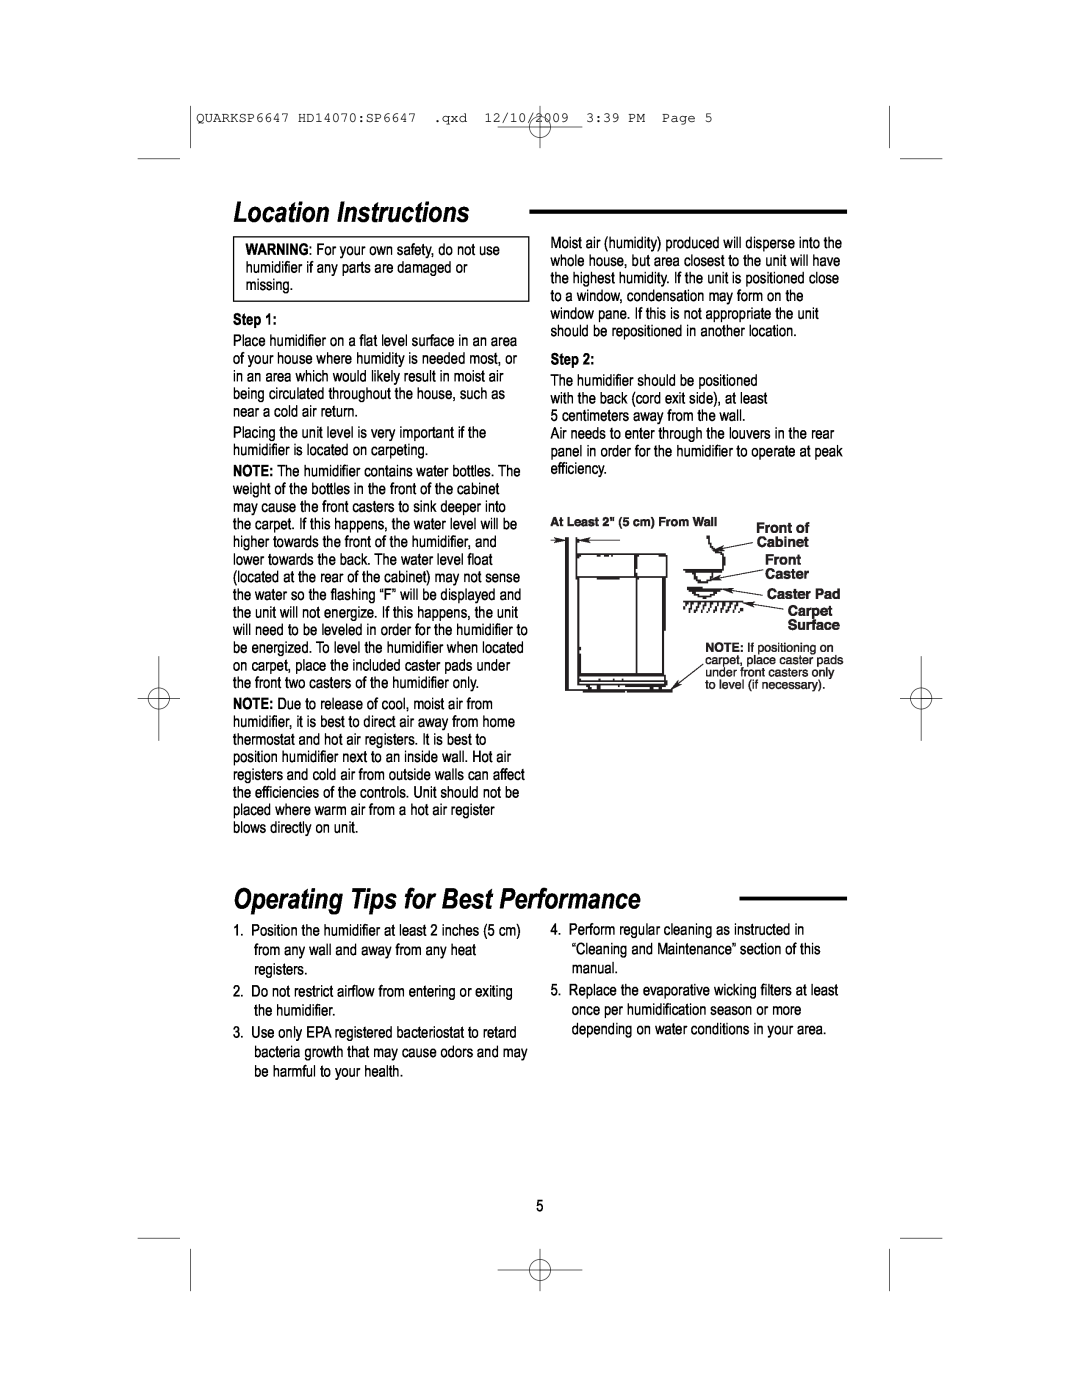 MoistAir HD14070 owner manual Location Instructions, Operating Tips for Best Performance, Step 